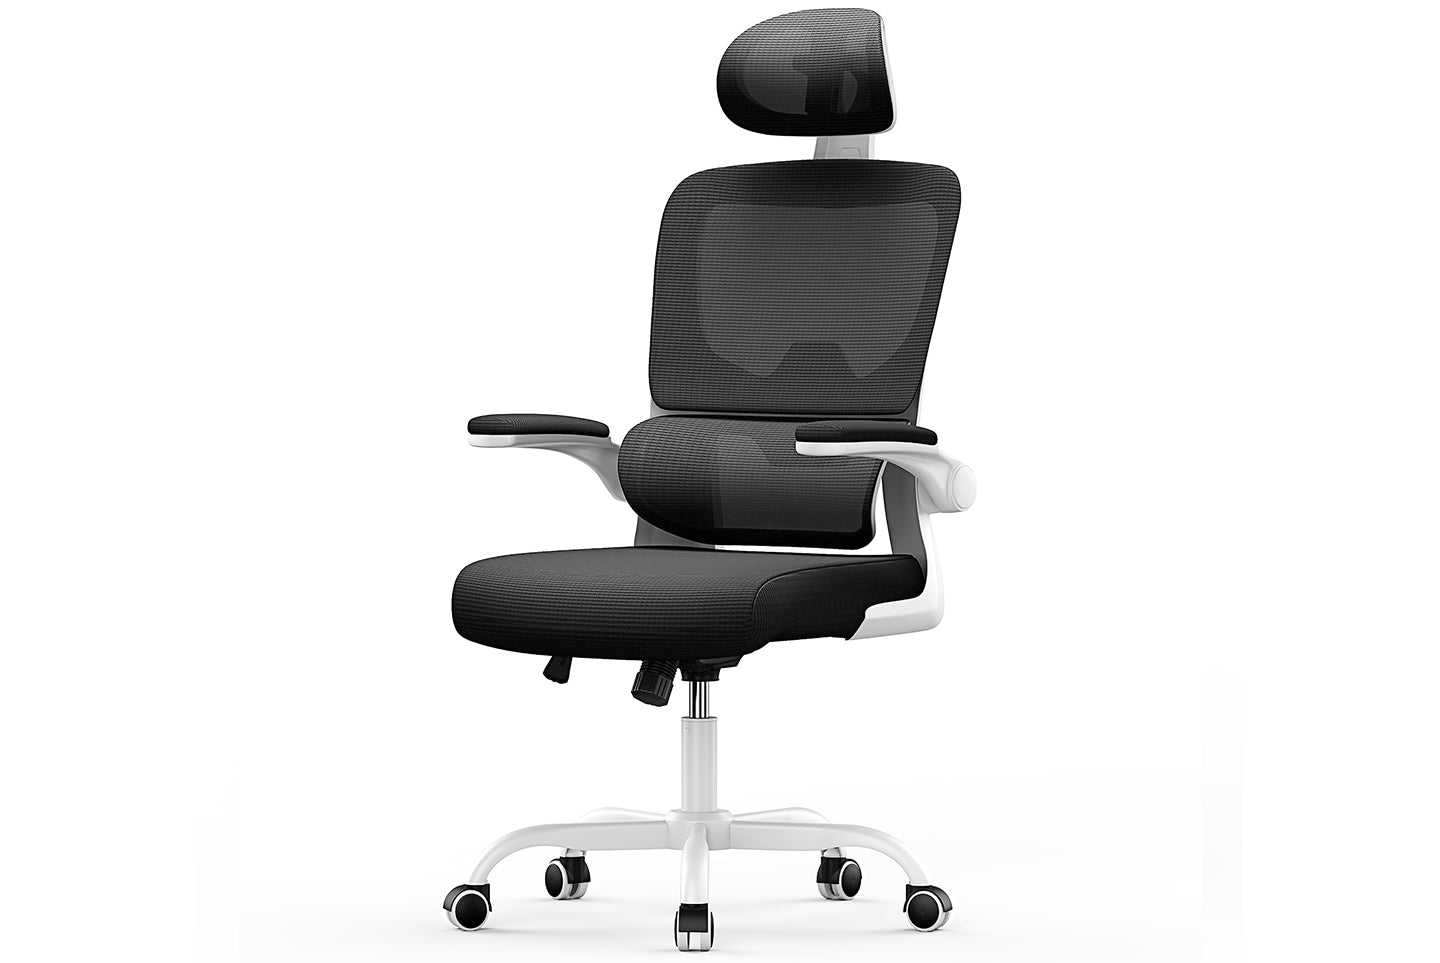 Ergonomic Desk Chair Swivel Computer Chair for Home Office Max Load 150kg, With Headrest Plus / White